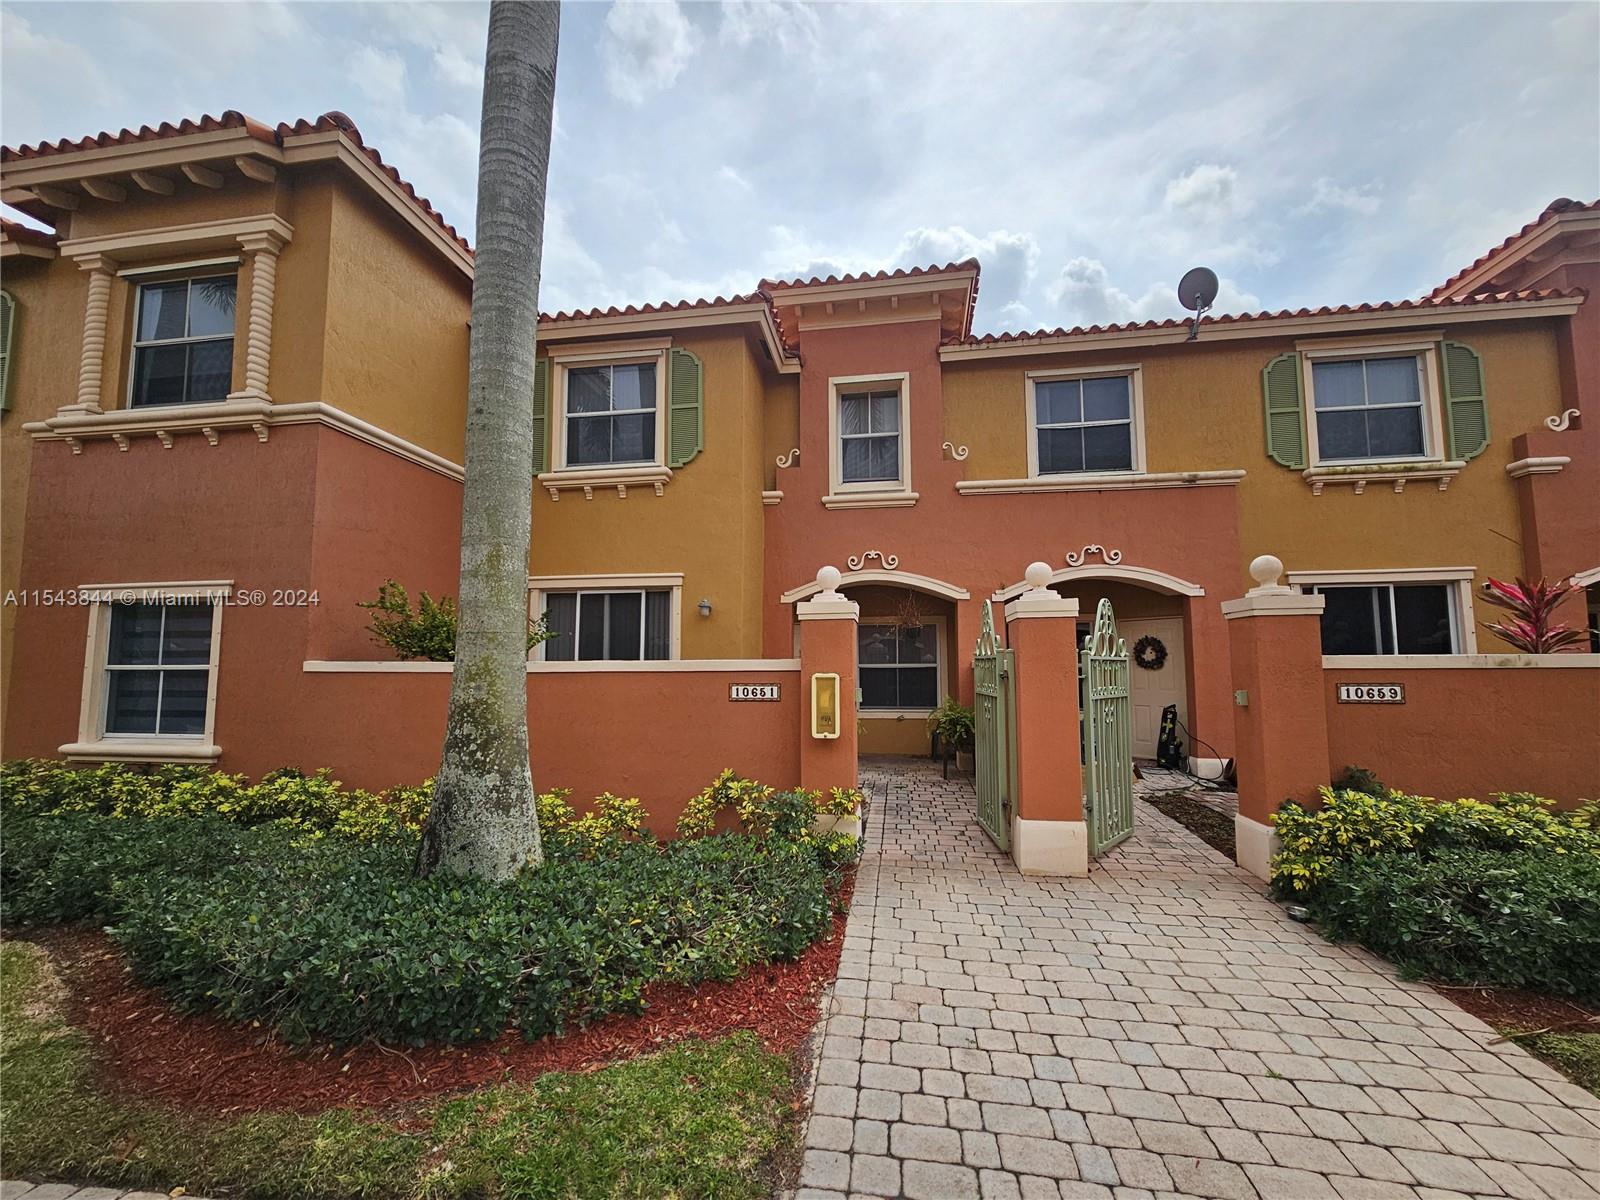 10651 SW 7th St 1807, Pembroke Pines, Florida 33025, 3 Bedrooms Bedrooms, ,2 BathroomsBathrooms,Residential,For Sale,10651 SW 7th St 1807,A11543844